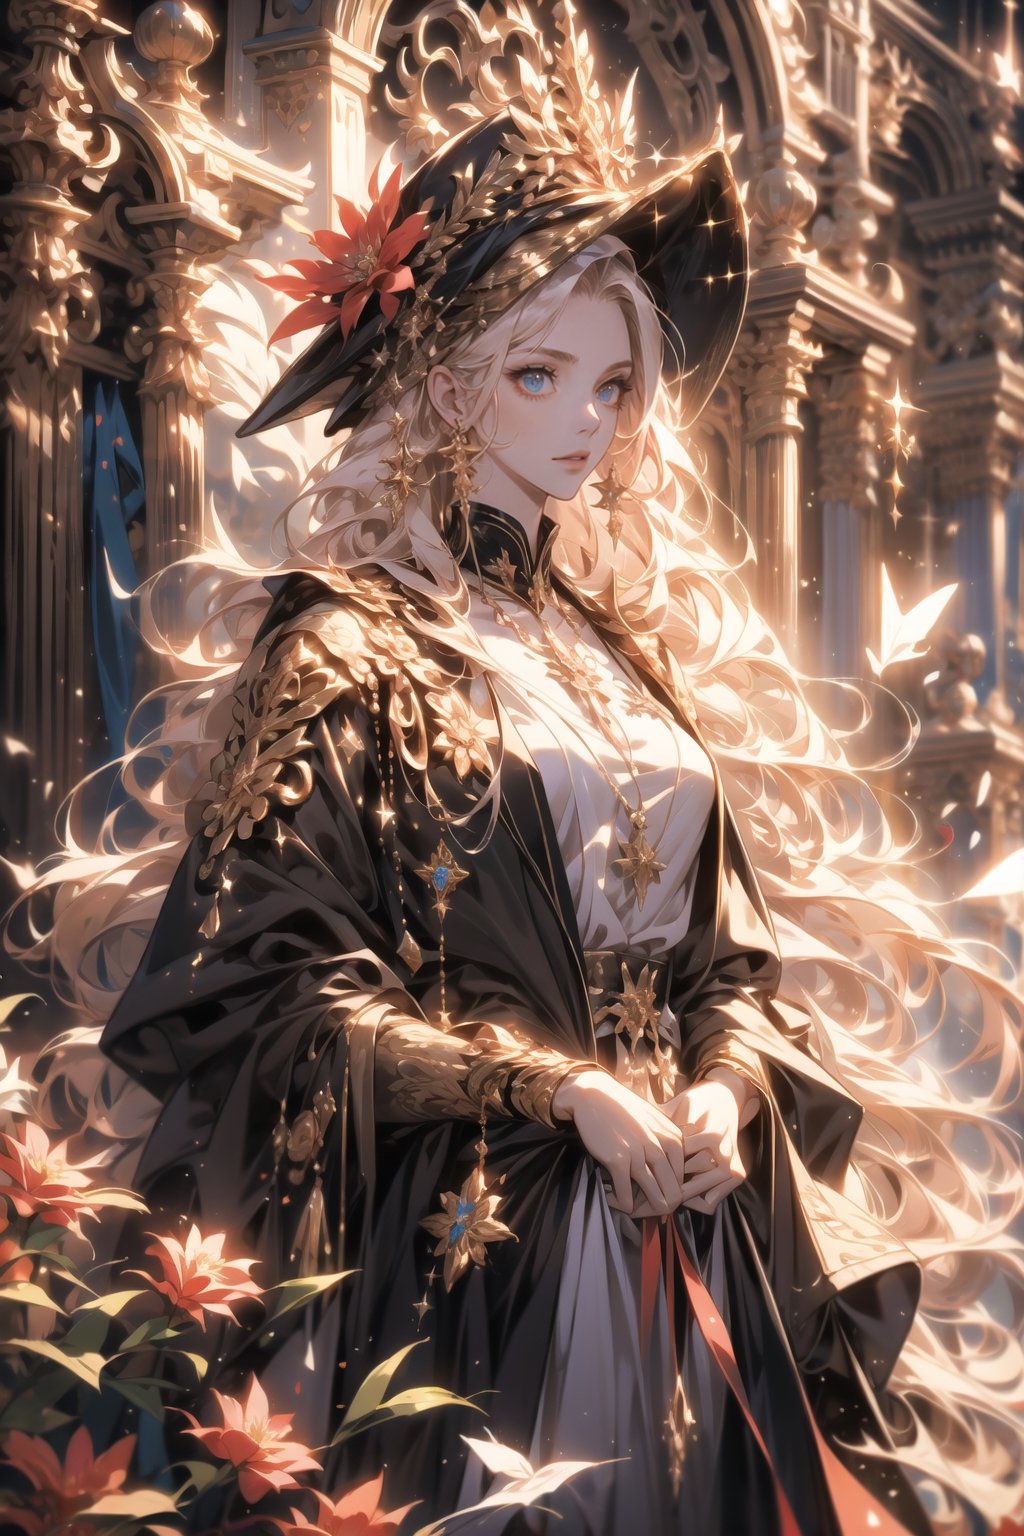 A young women wearing a future army uniform, with a wizard hat, countless glass shards, magic aperture, and crimson flowers,GdClth